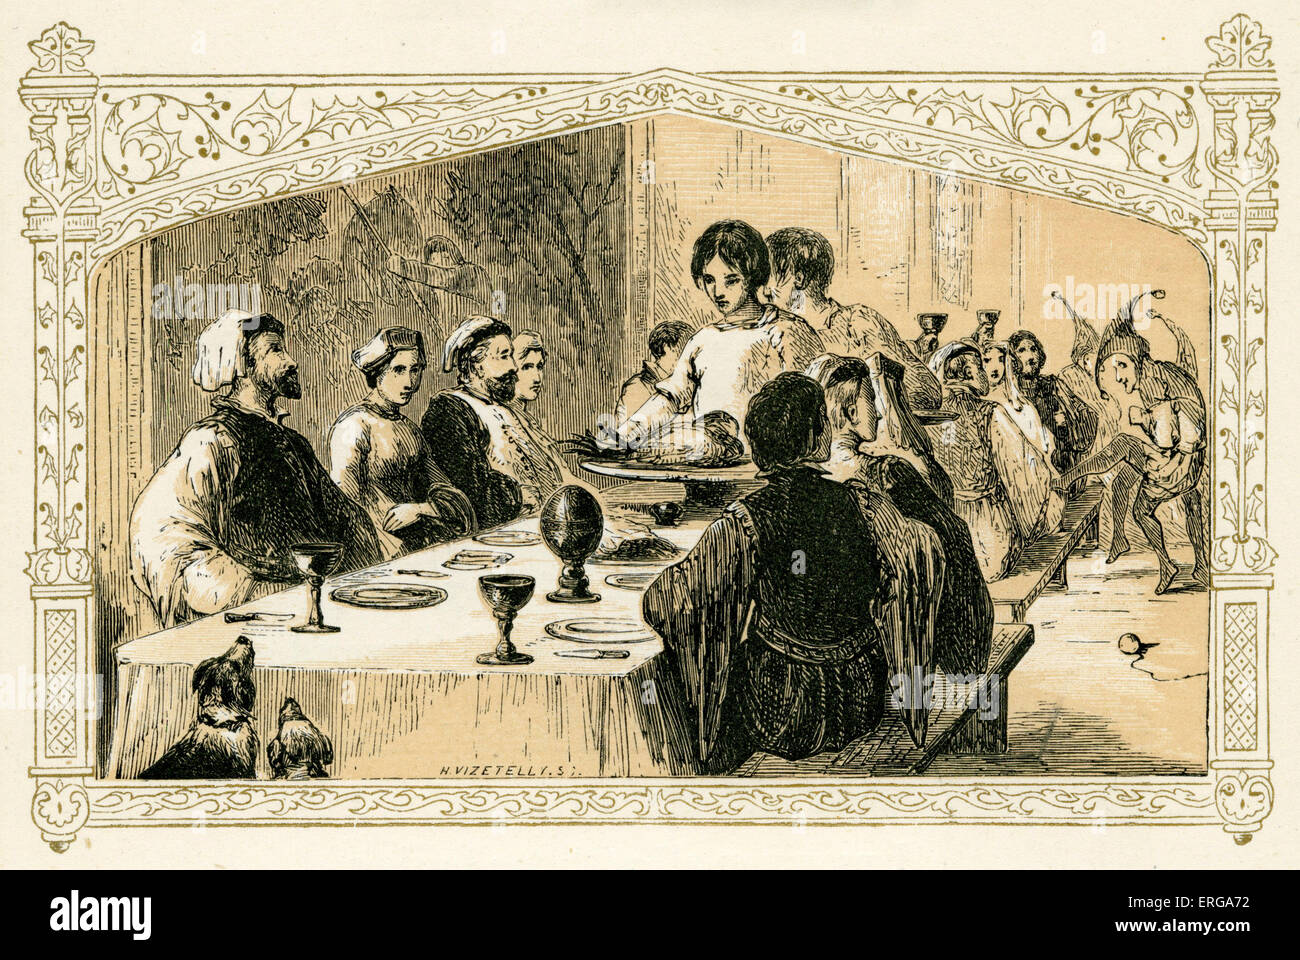 Medieval Christmas feast - illustration by Birket Foster, 1872. Stock Photo